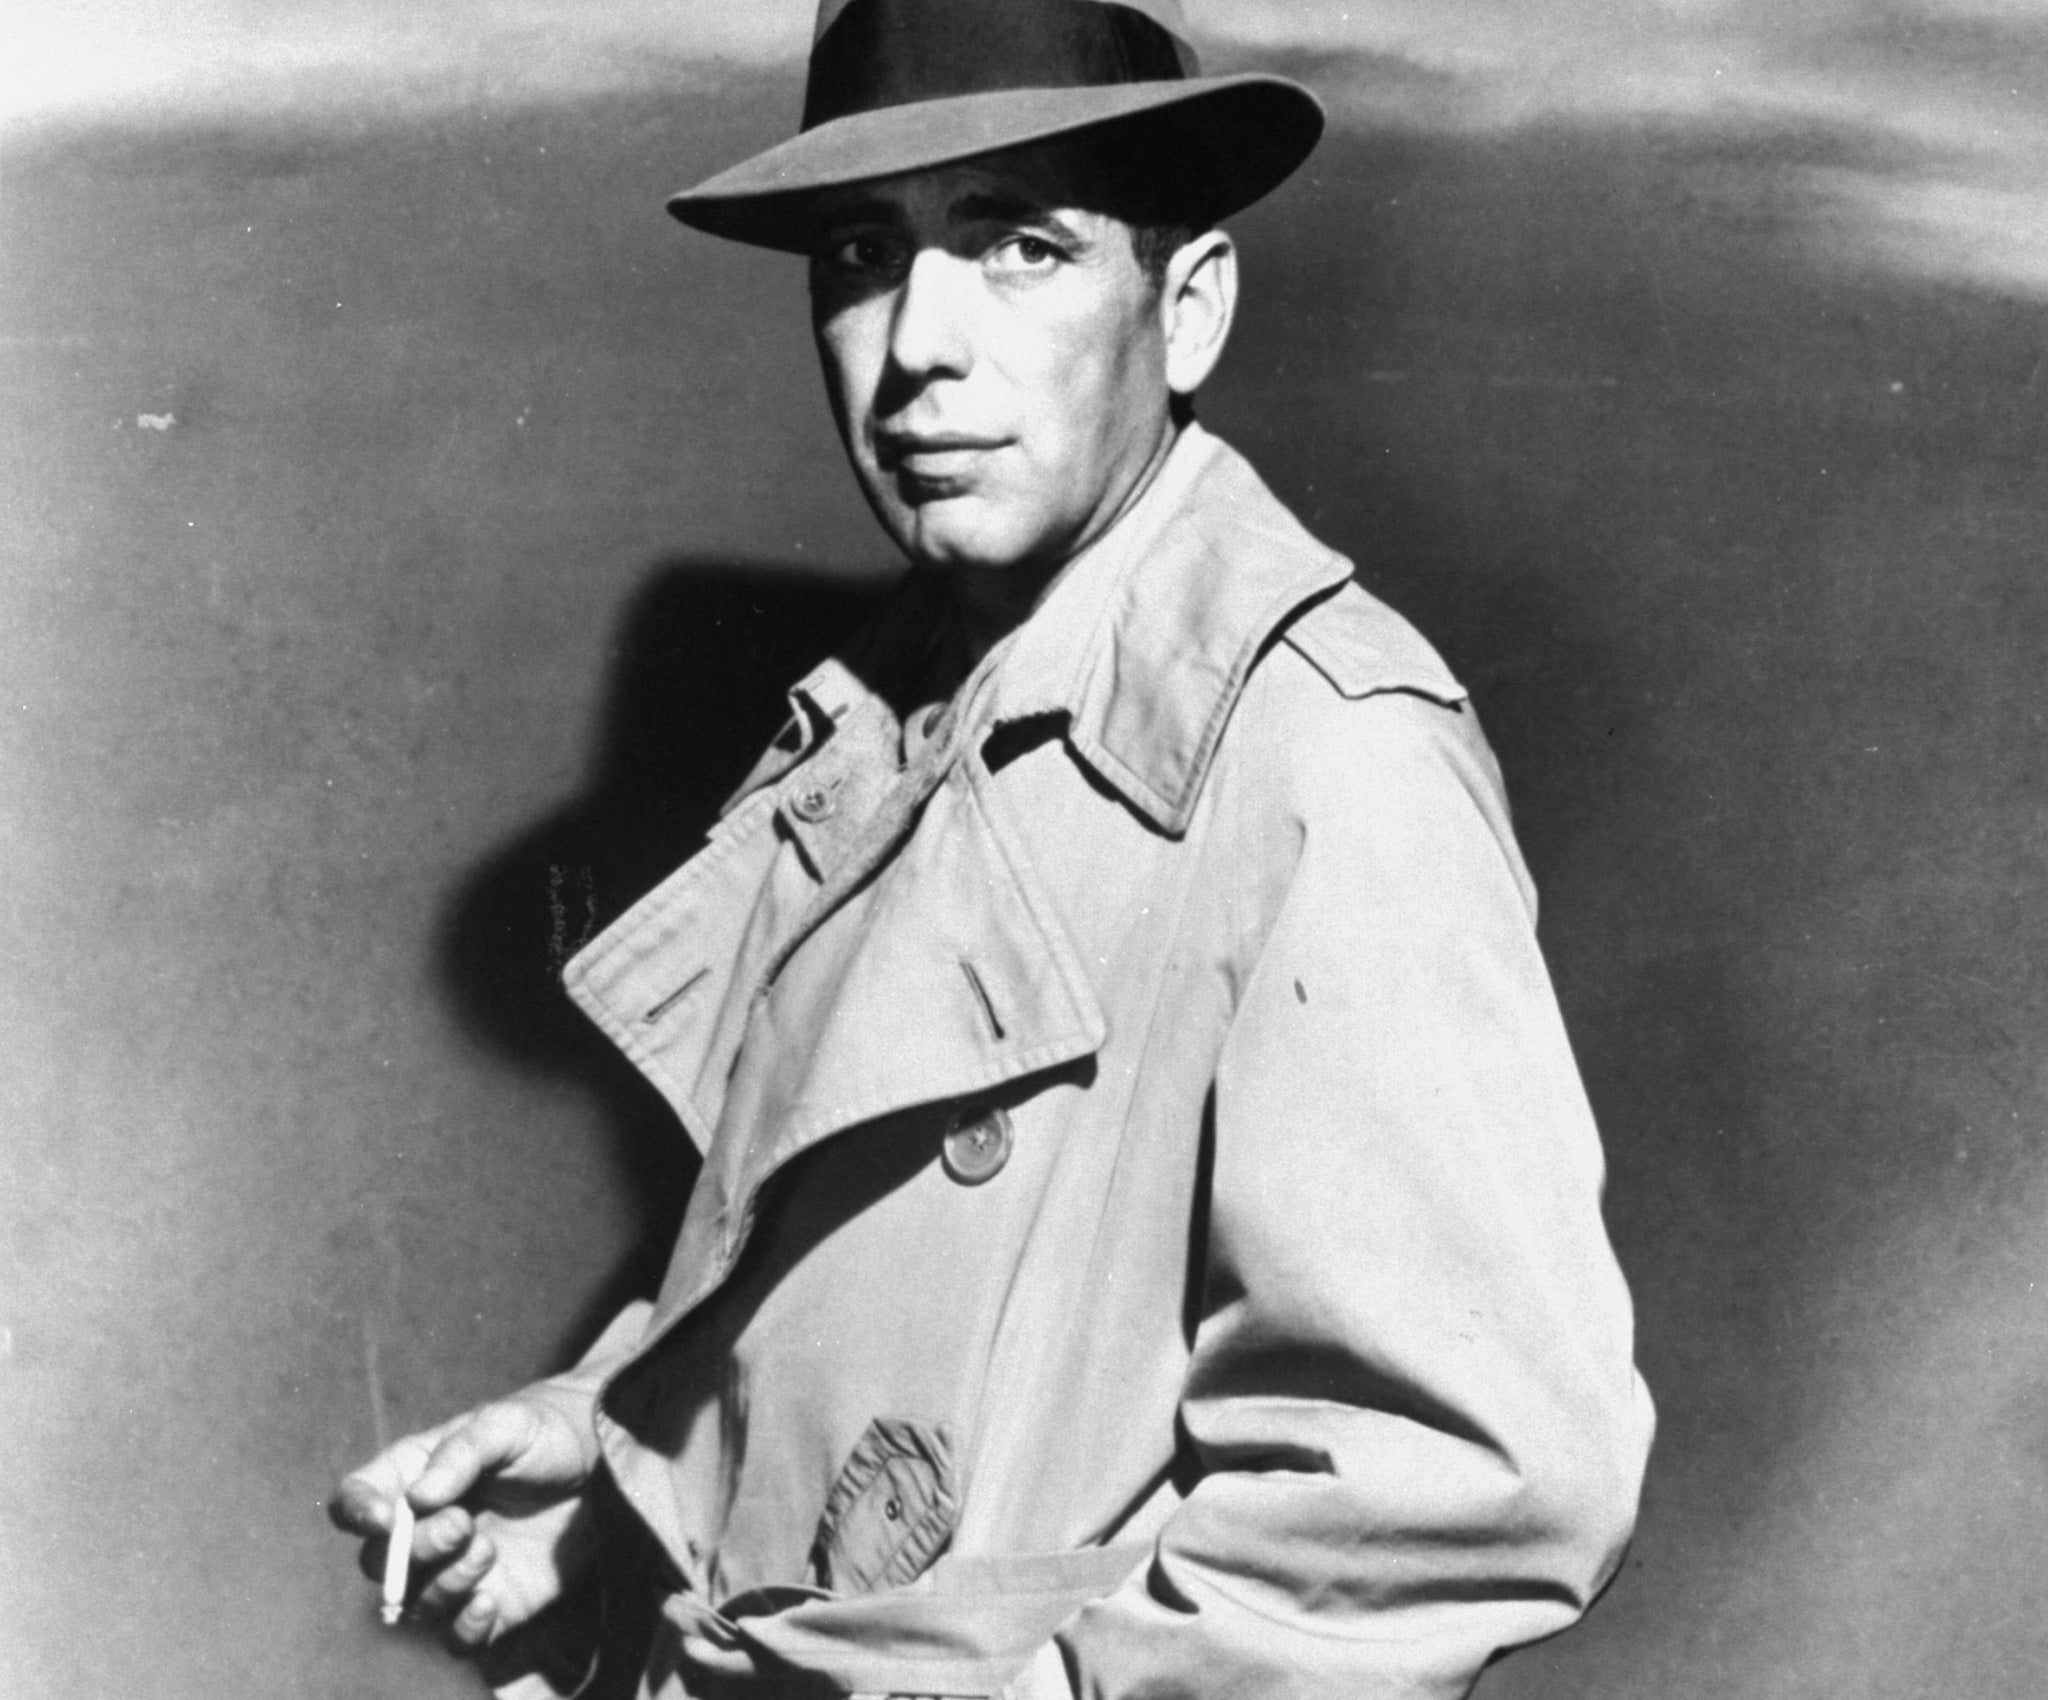 A world without cigarettes would be a world without Humphrey Bogart cool